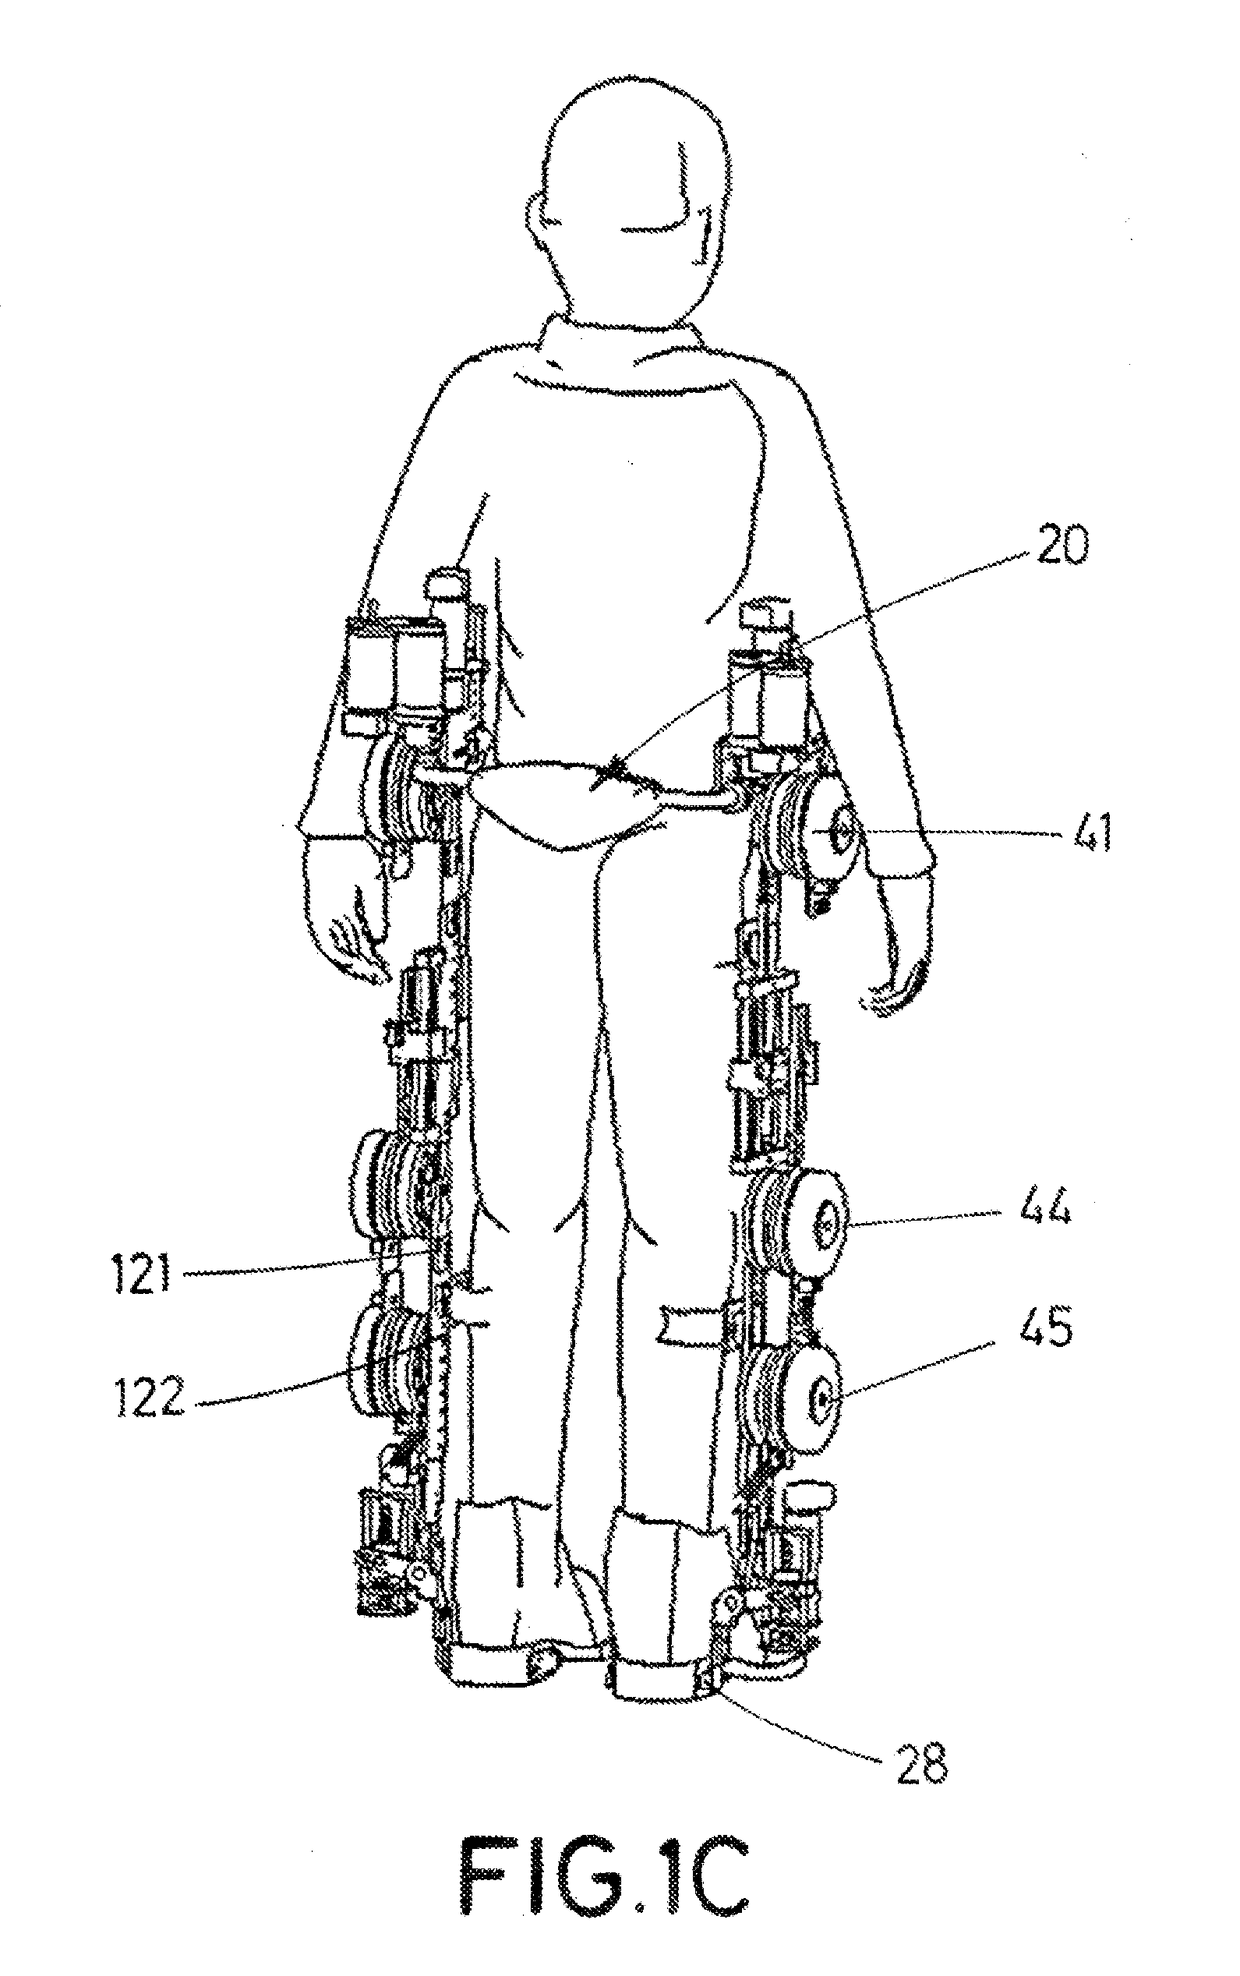 Exoskeleton for assisting human movement